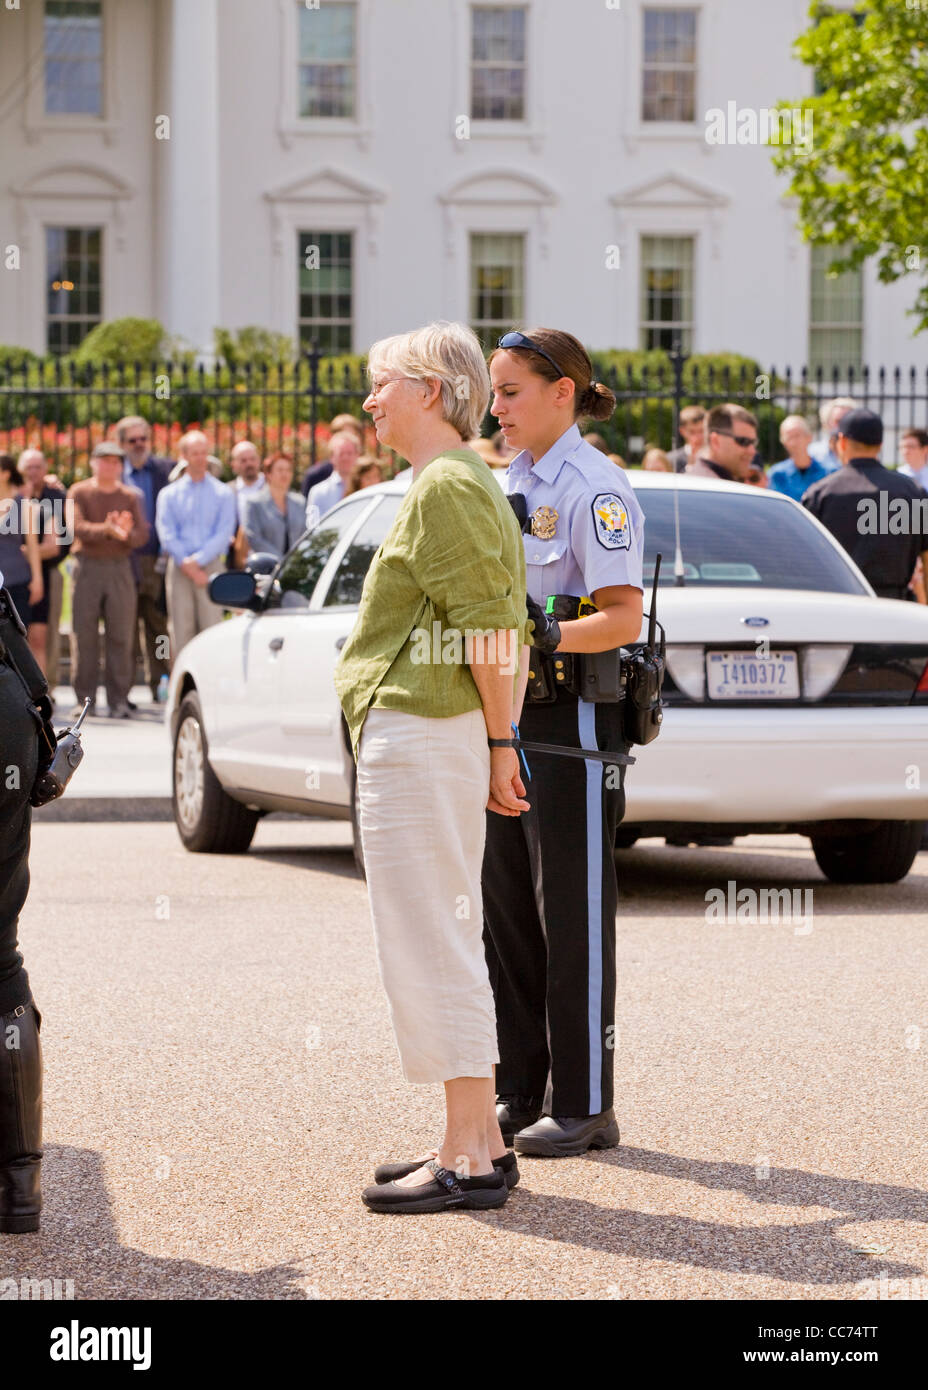 Female demonstrator is handcuffed and taken away by police at a public protest - Washington, DC USA Stock Photo